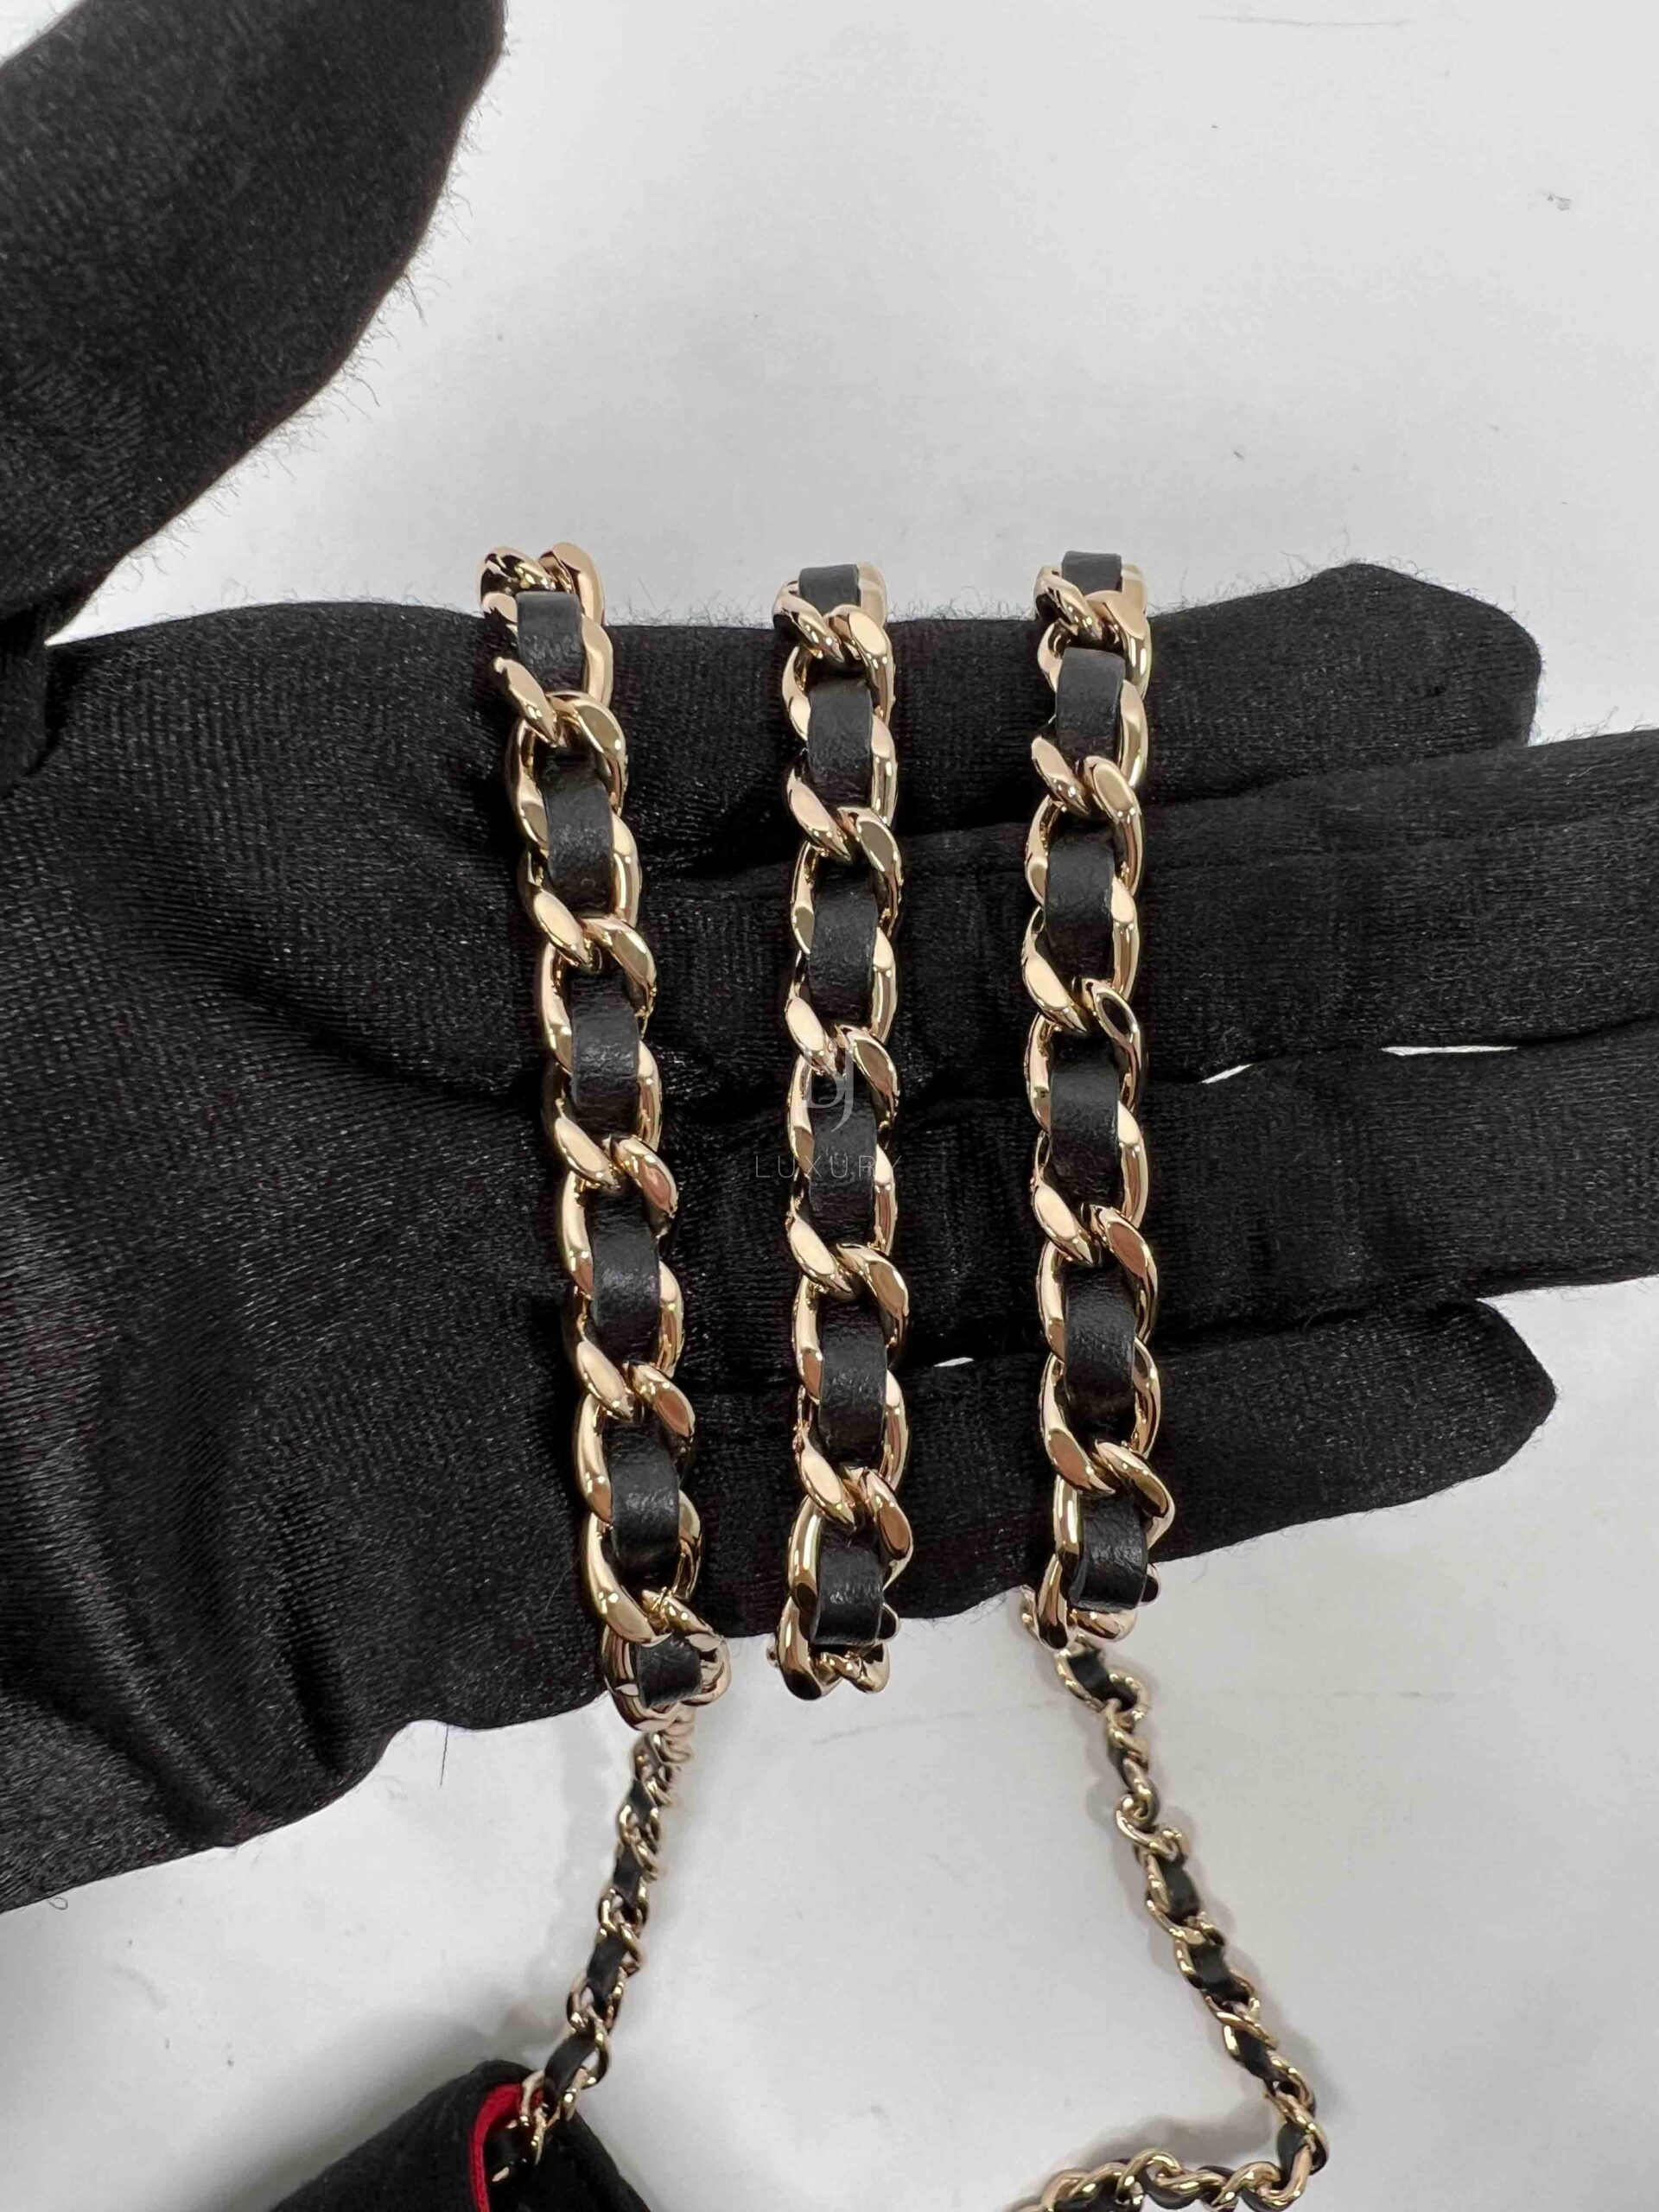 CHANEL-CLUTCHWITHCHAIN-MICROMINI-BLACK-JERSEY-Photo 23-2-23, 11 10 36.jpg